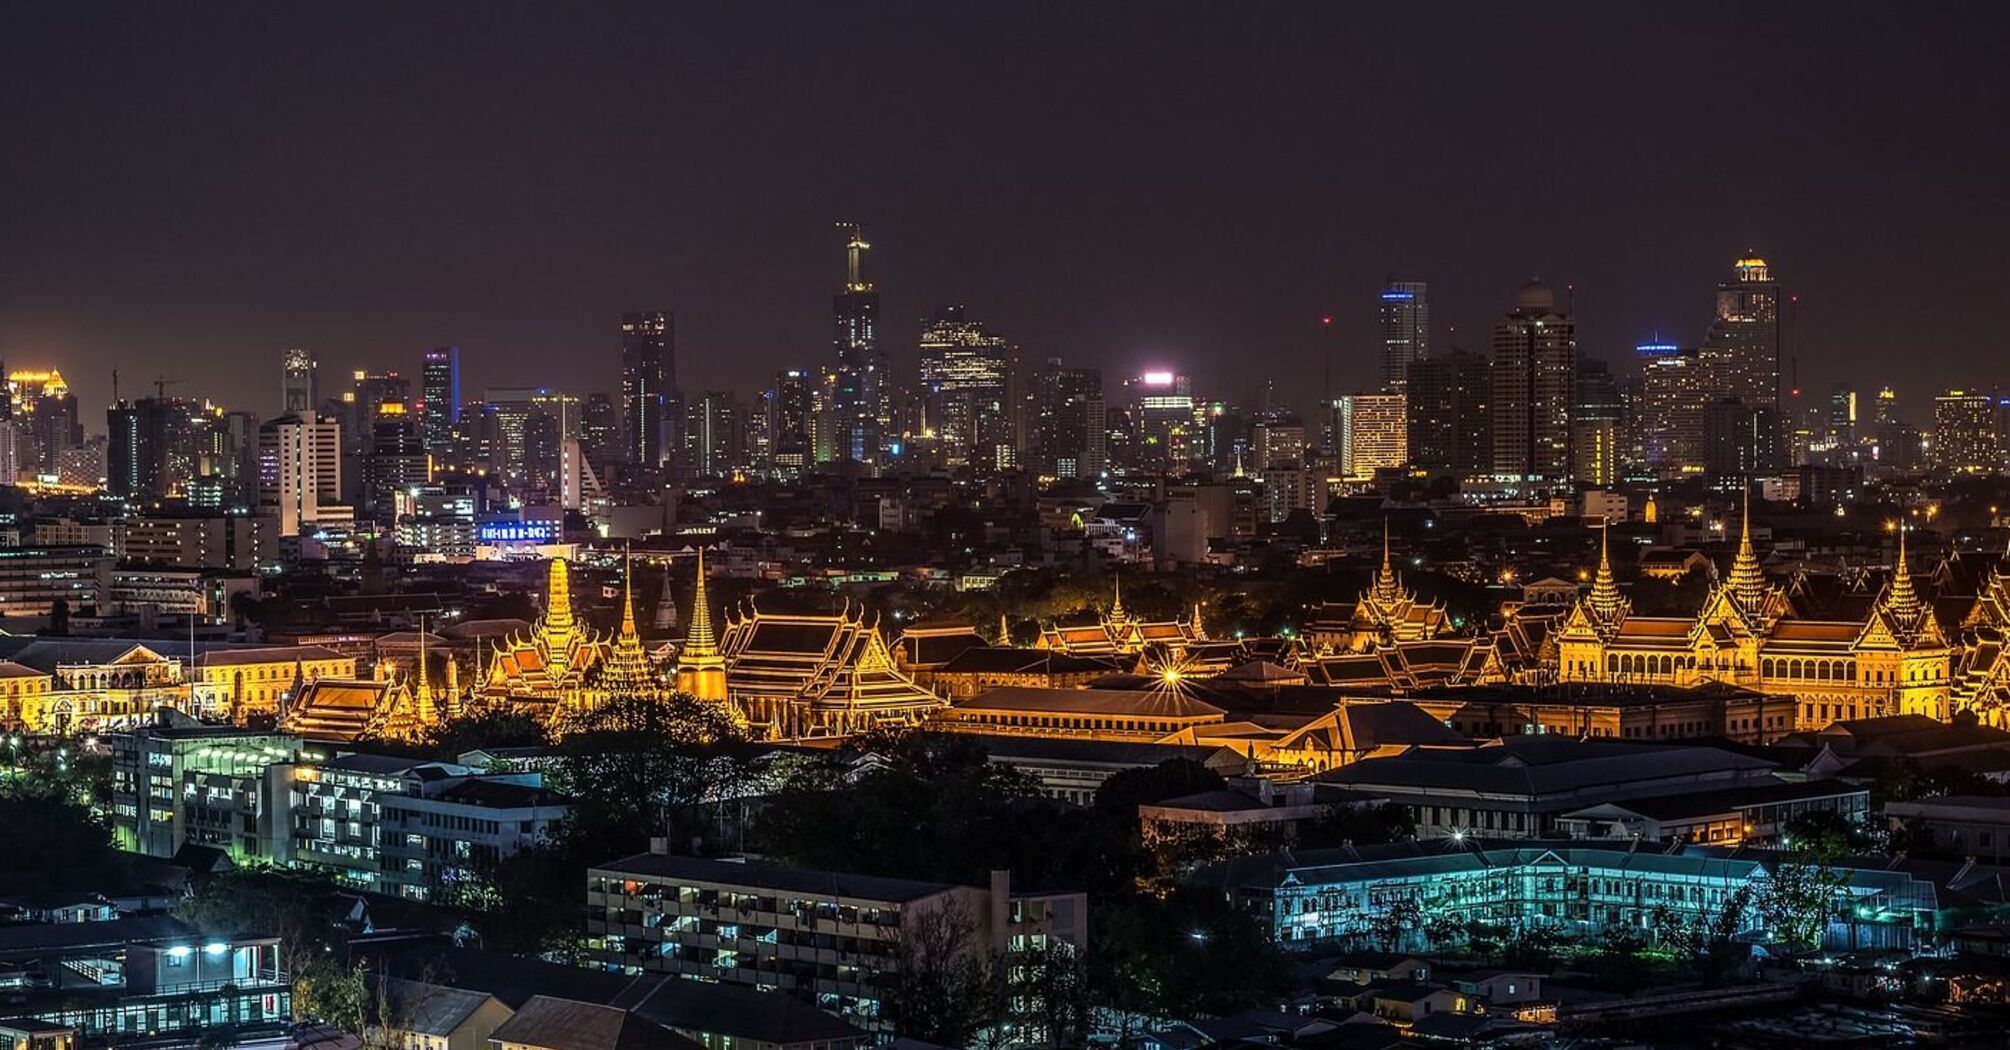 A panoramic night view of Bangkok's cityscape with illuminated Grand Palace and surrounding modern skyscrapers